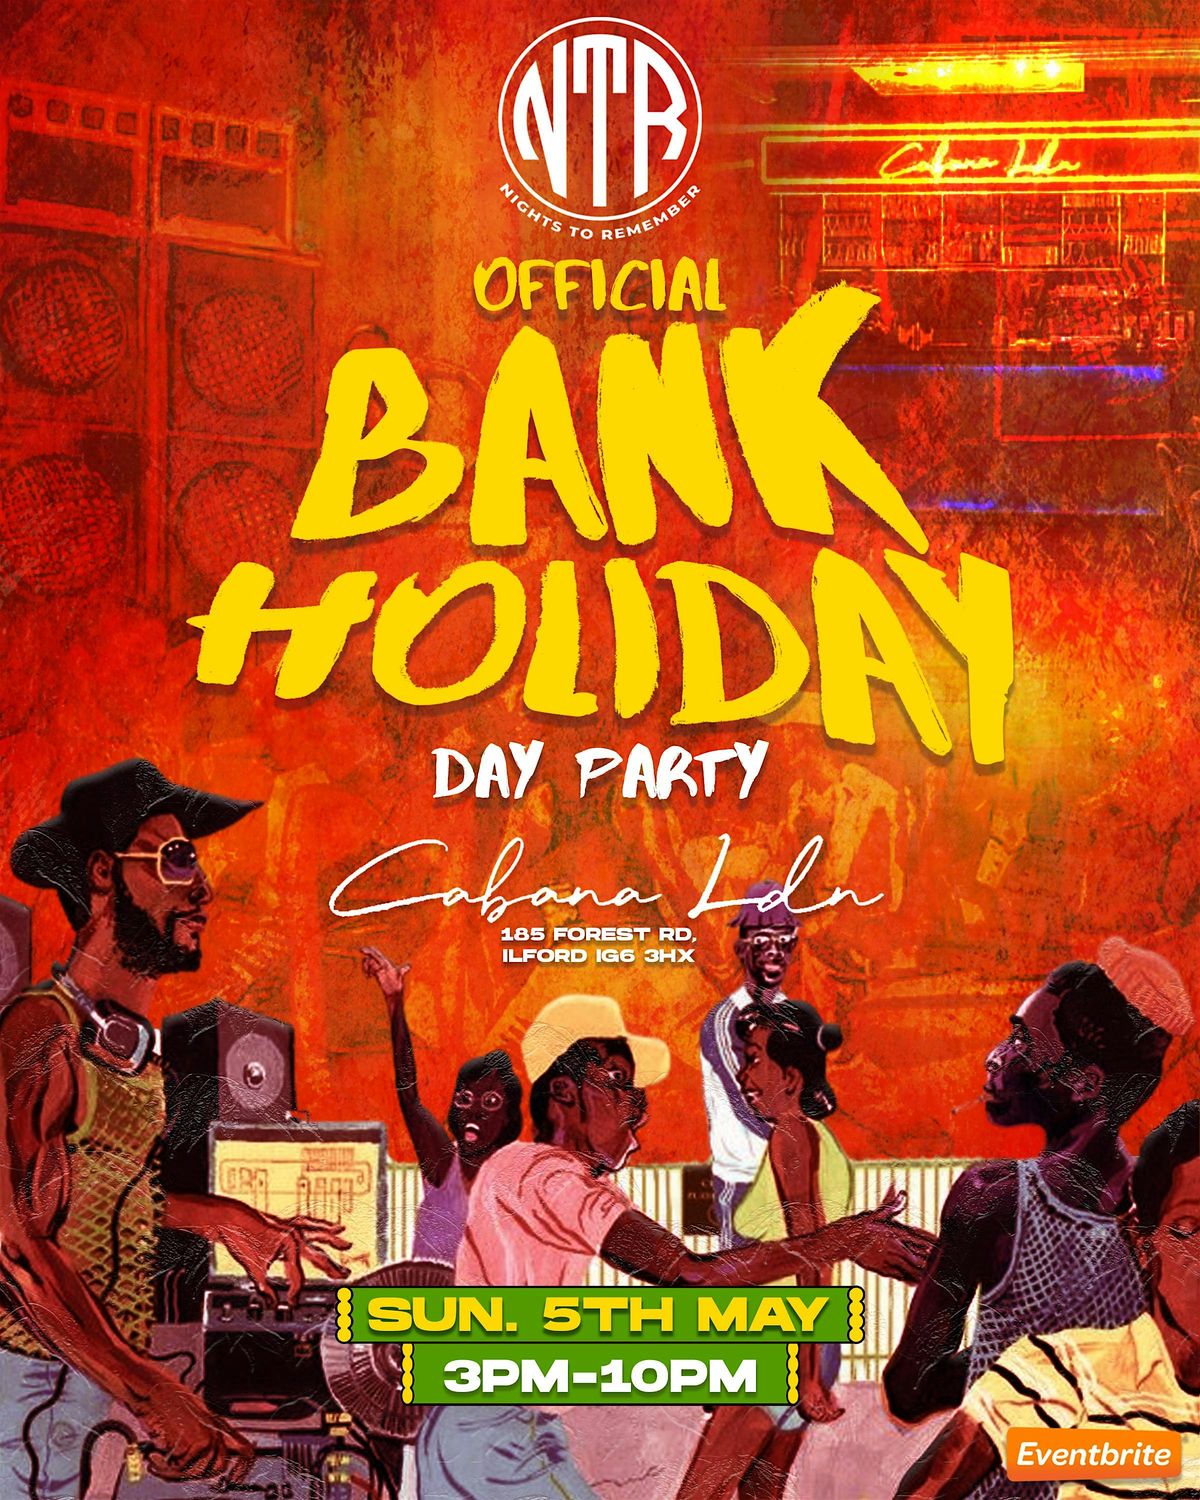 NTR OFFICIAL BANK HOLIDAY DAY PARTY